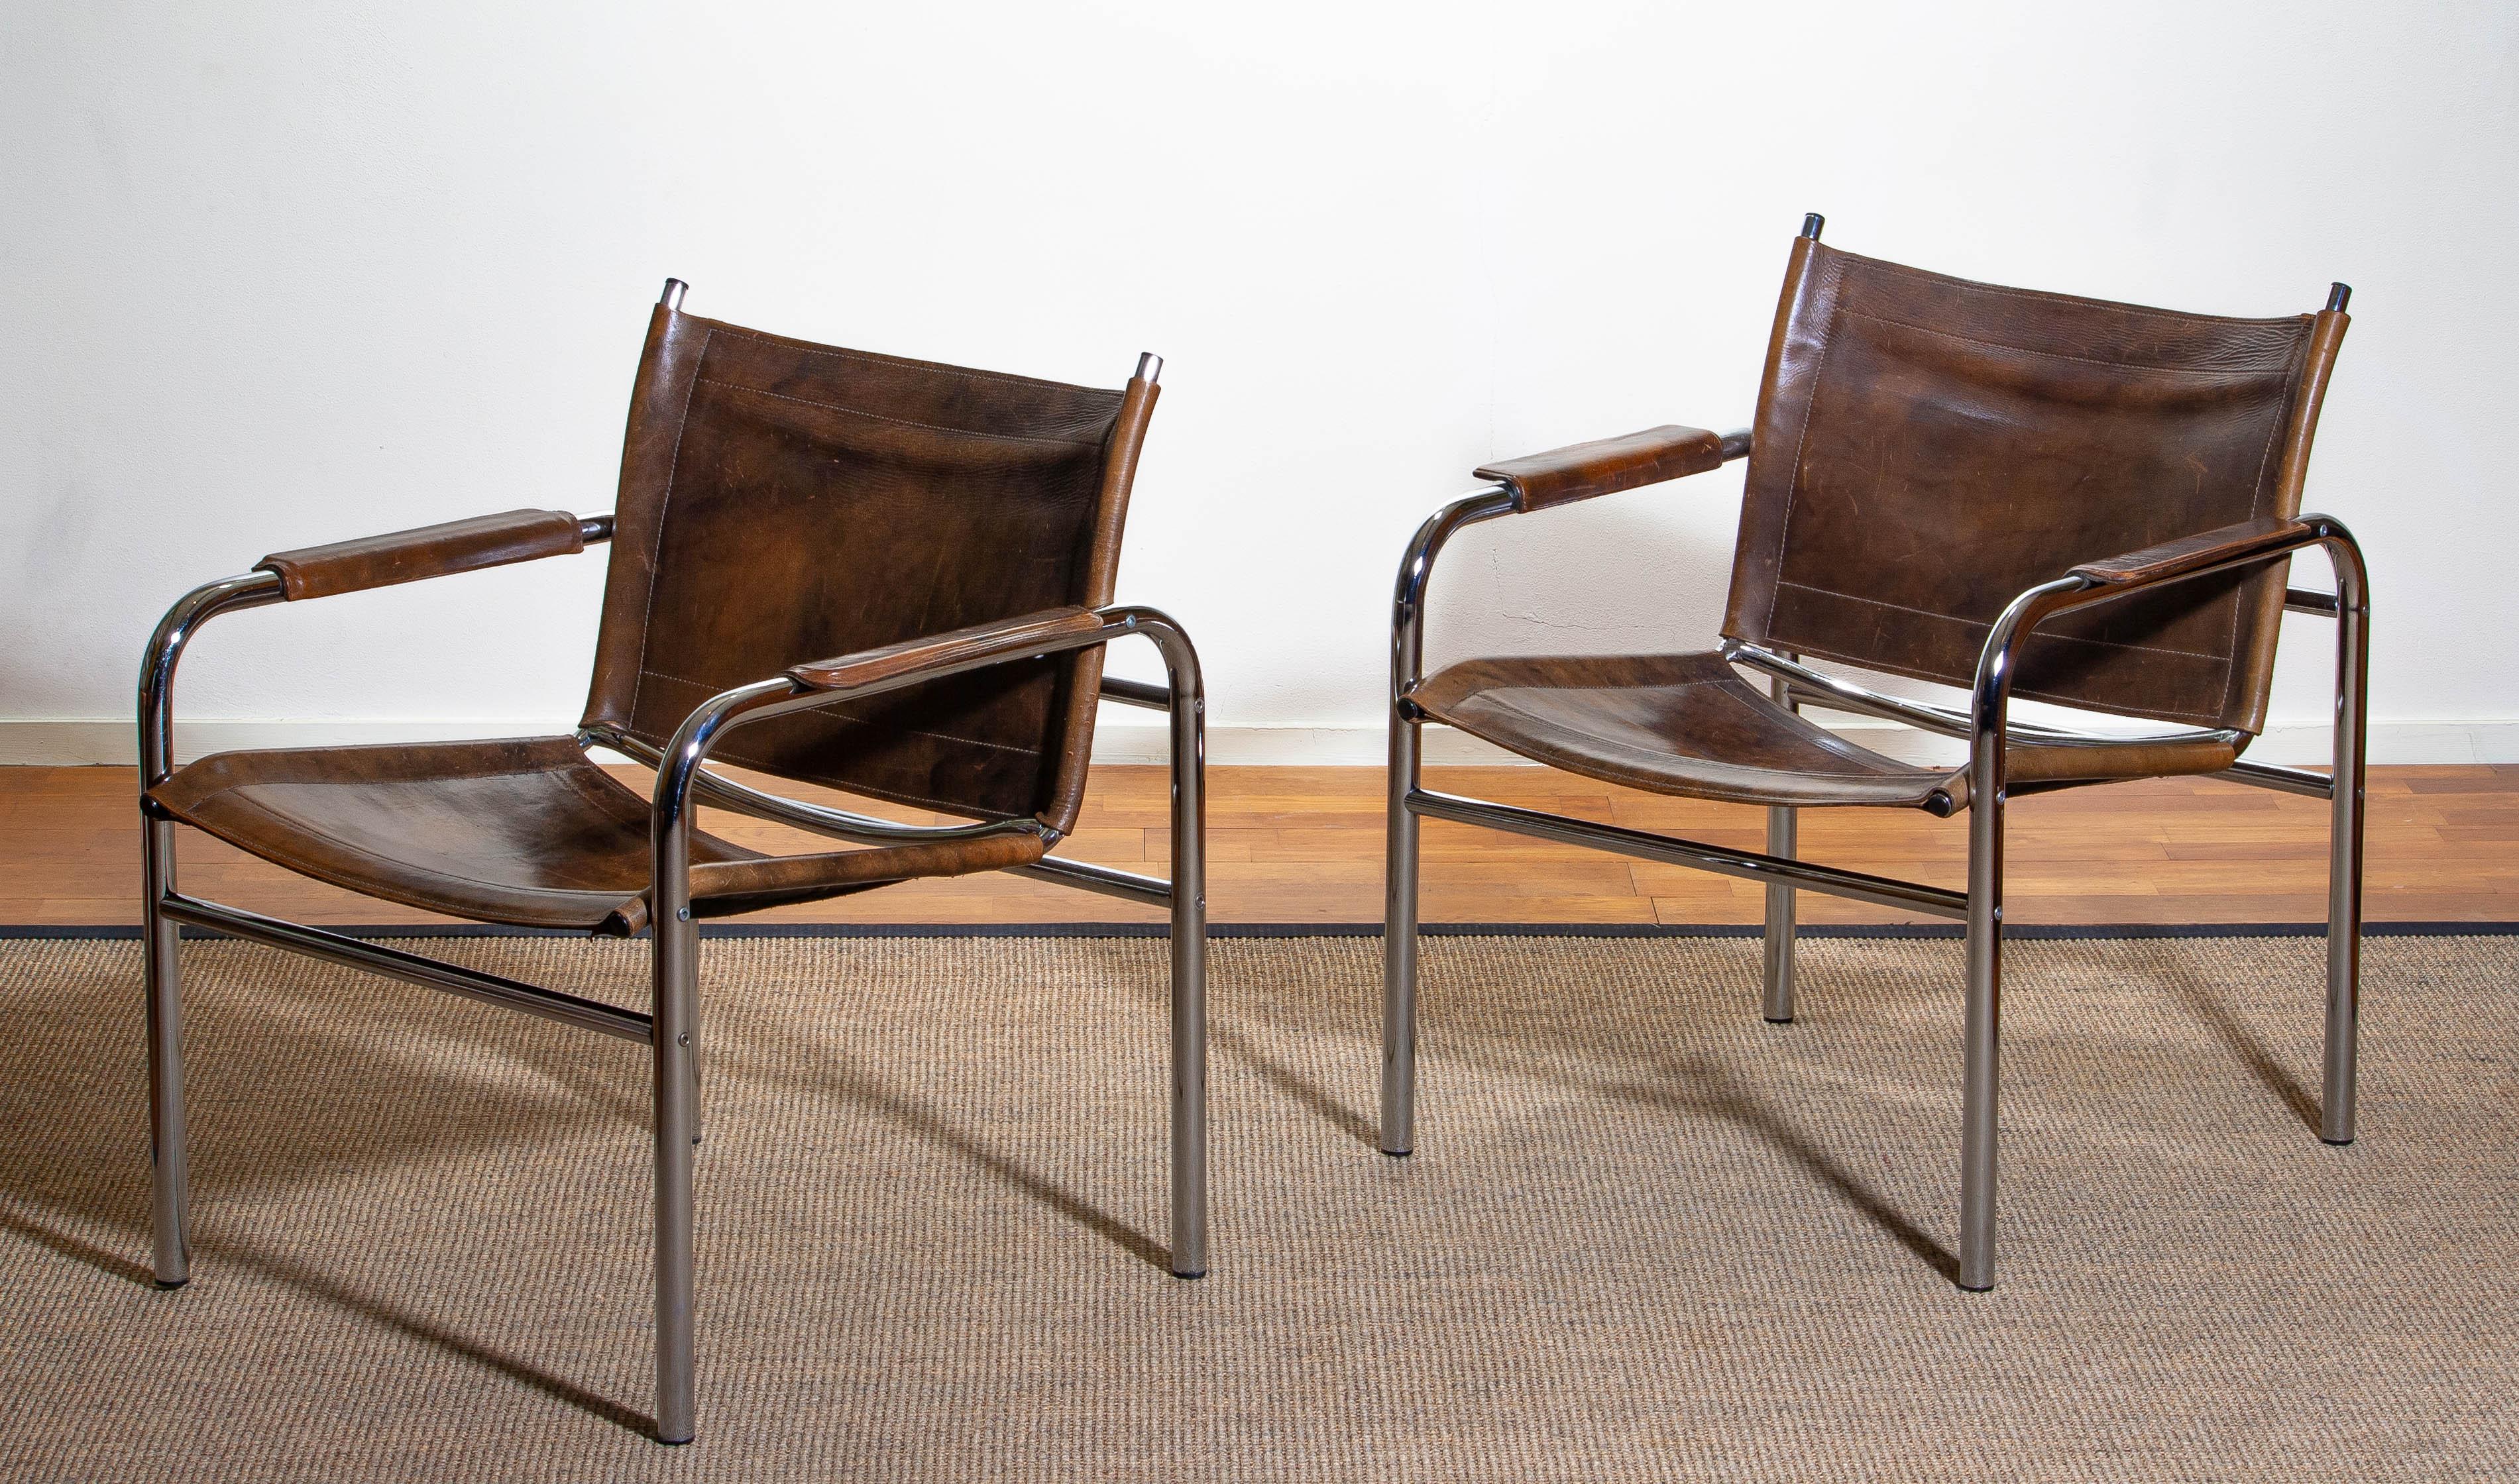 1980s, Pair of Leather and Tubular Steel Armchairs by Tord Bjorklund, Sweden  4